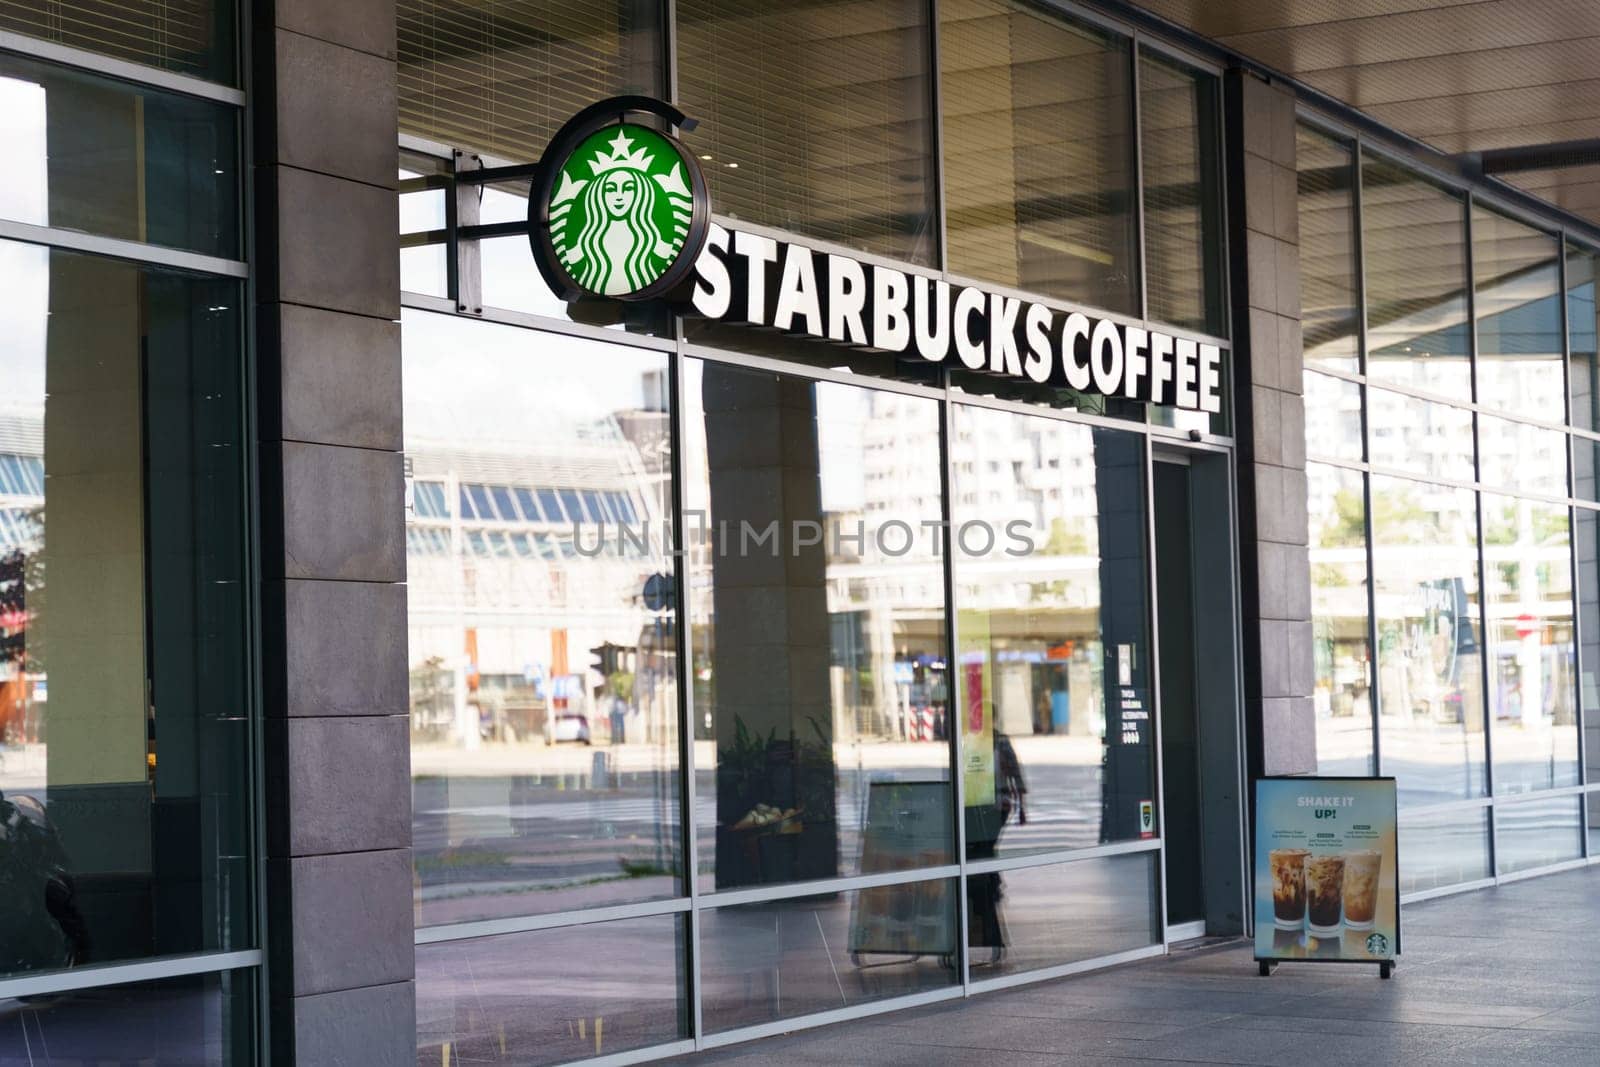 Wroclaw, Poland - August 4, 2023: A modern Starbucks Coffee shop with glass windows located on a busy city street. The view through the windows shows an urban scene with buildings and street activity in the background.